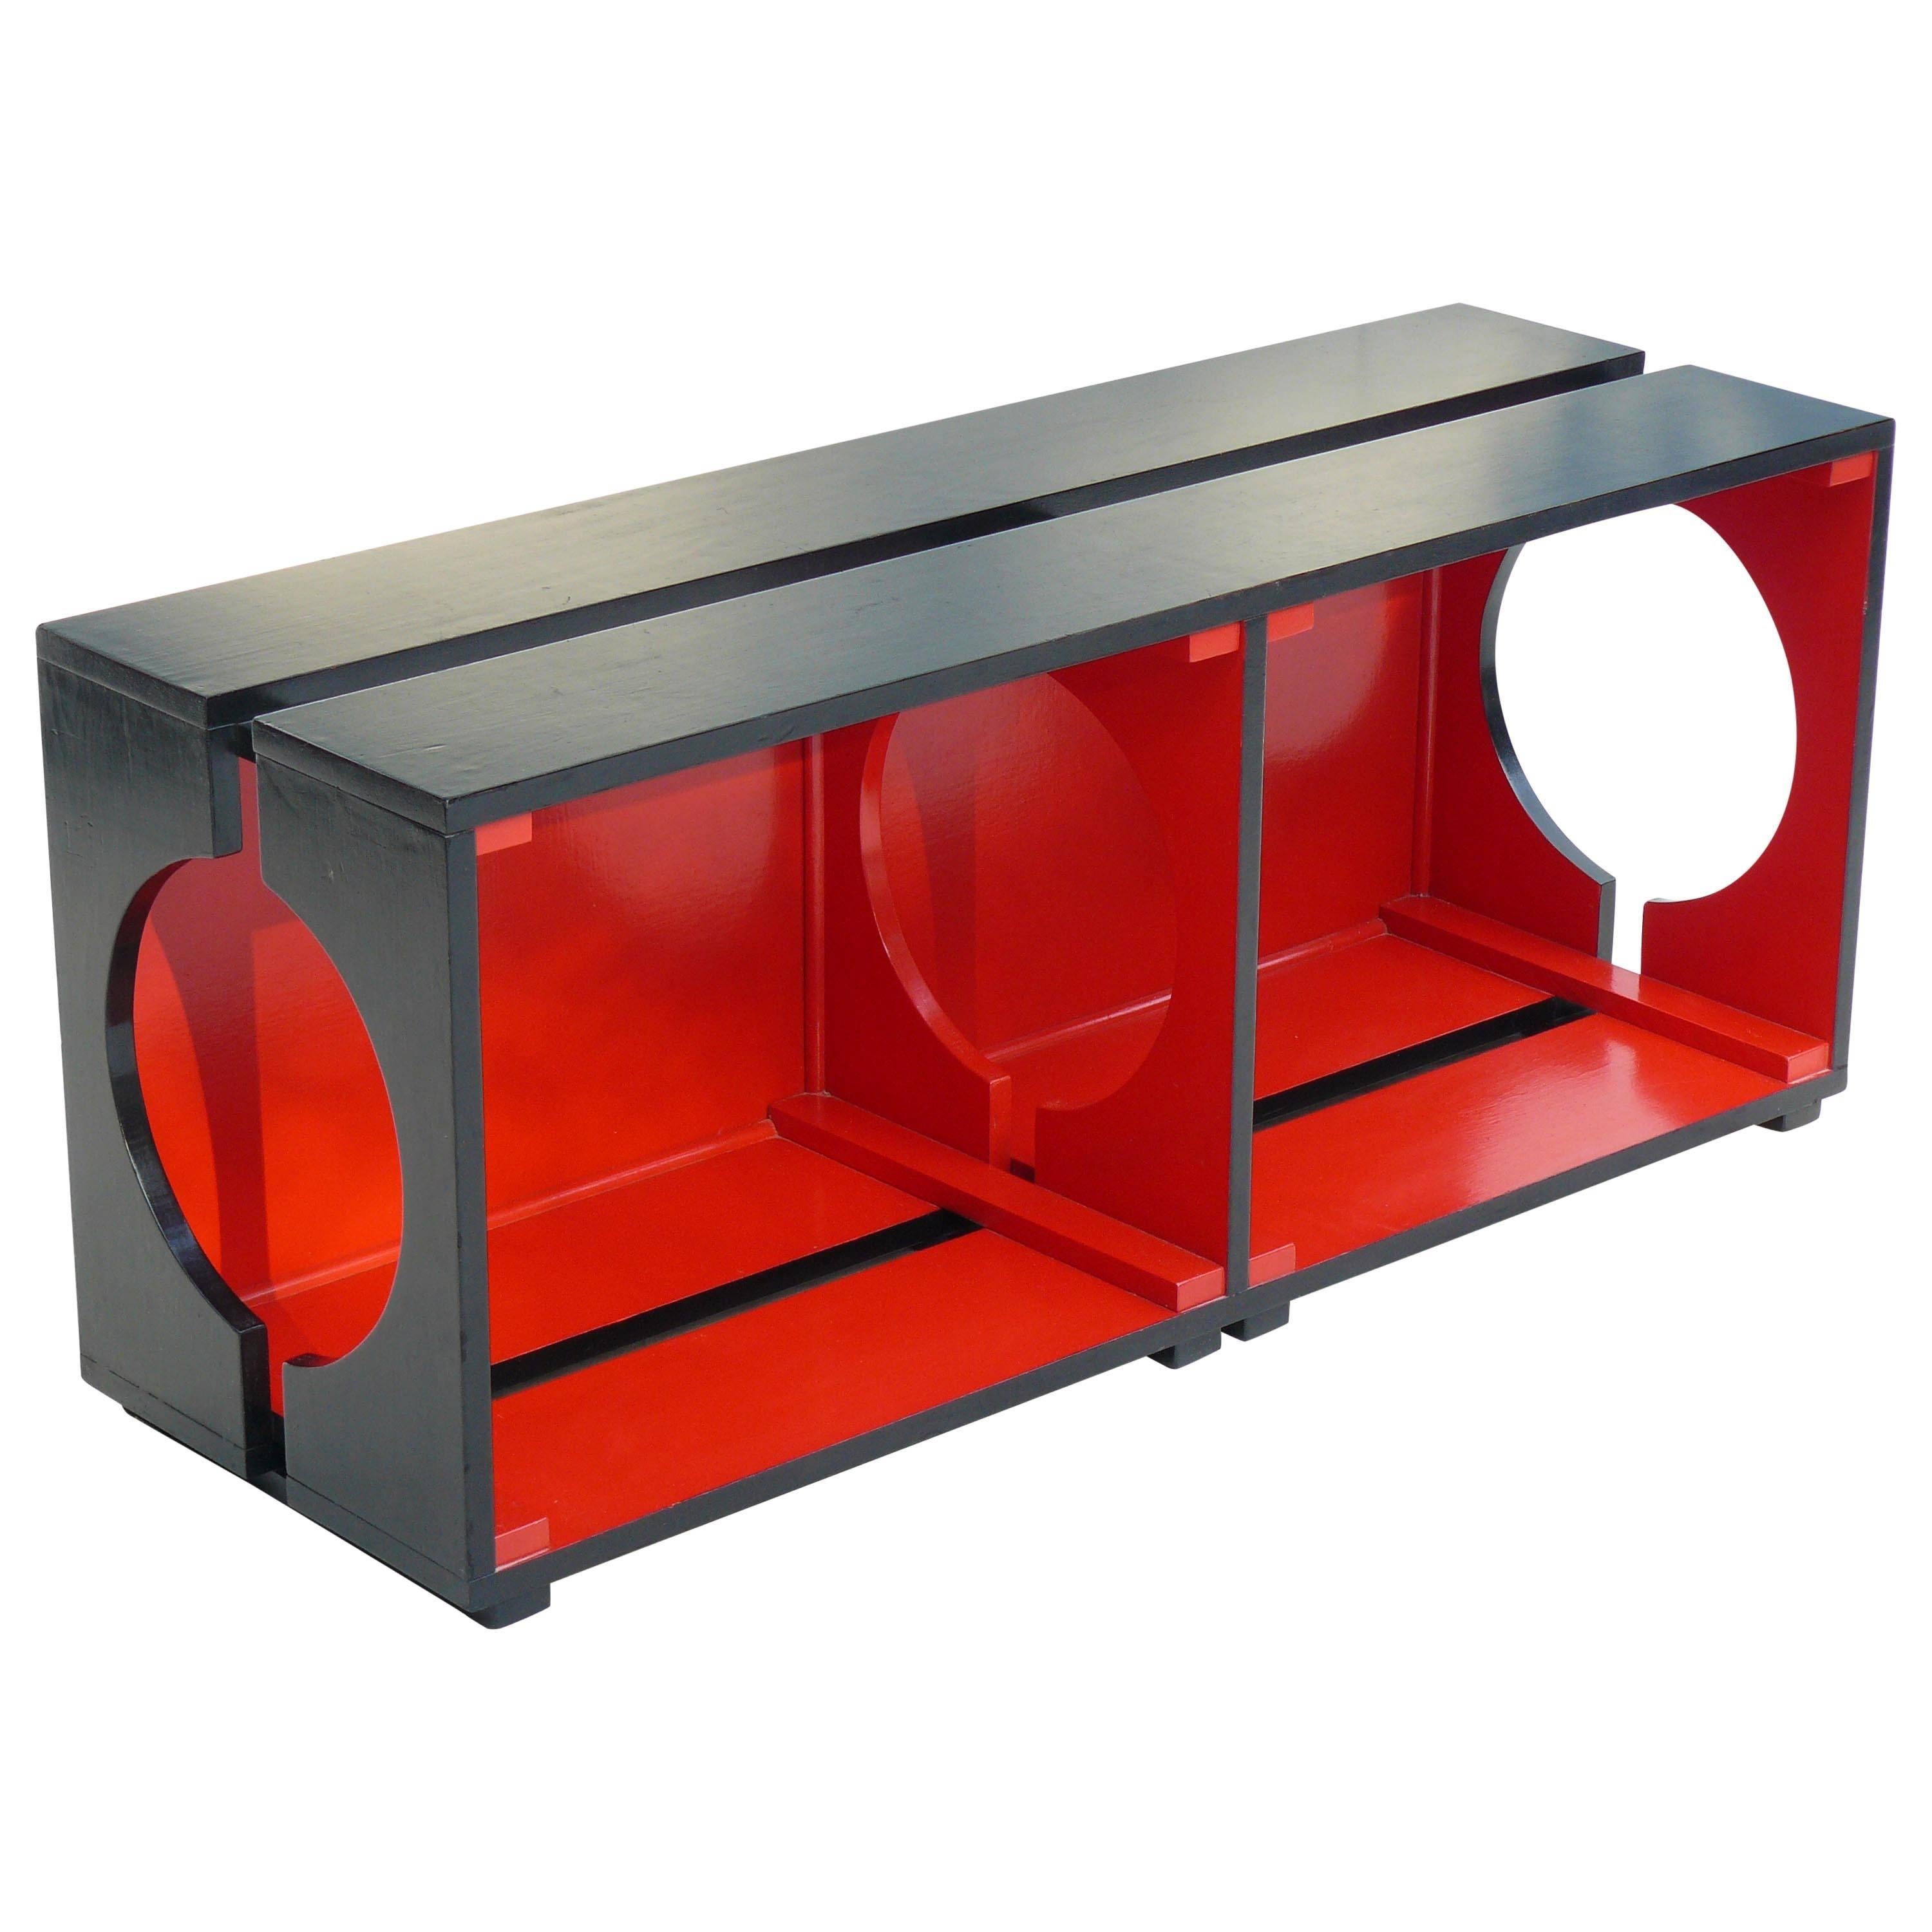 1940s Art Deco Black and Red Low Console For Sale